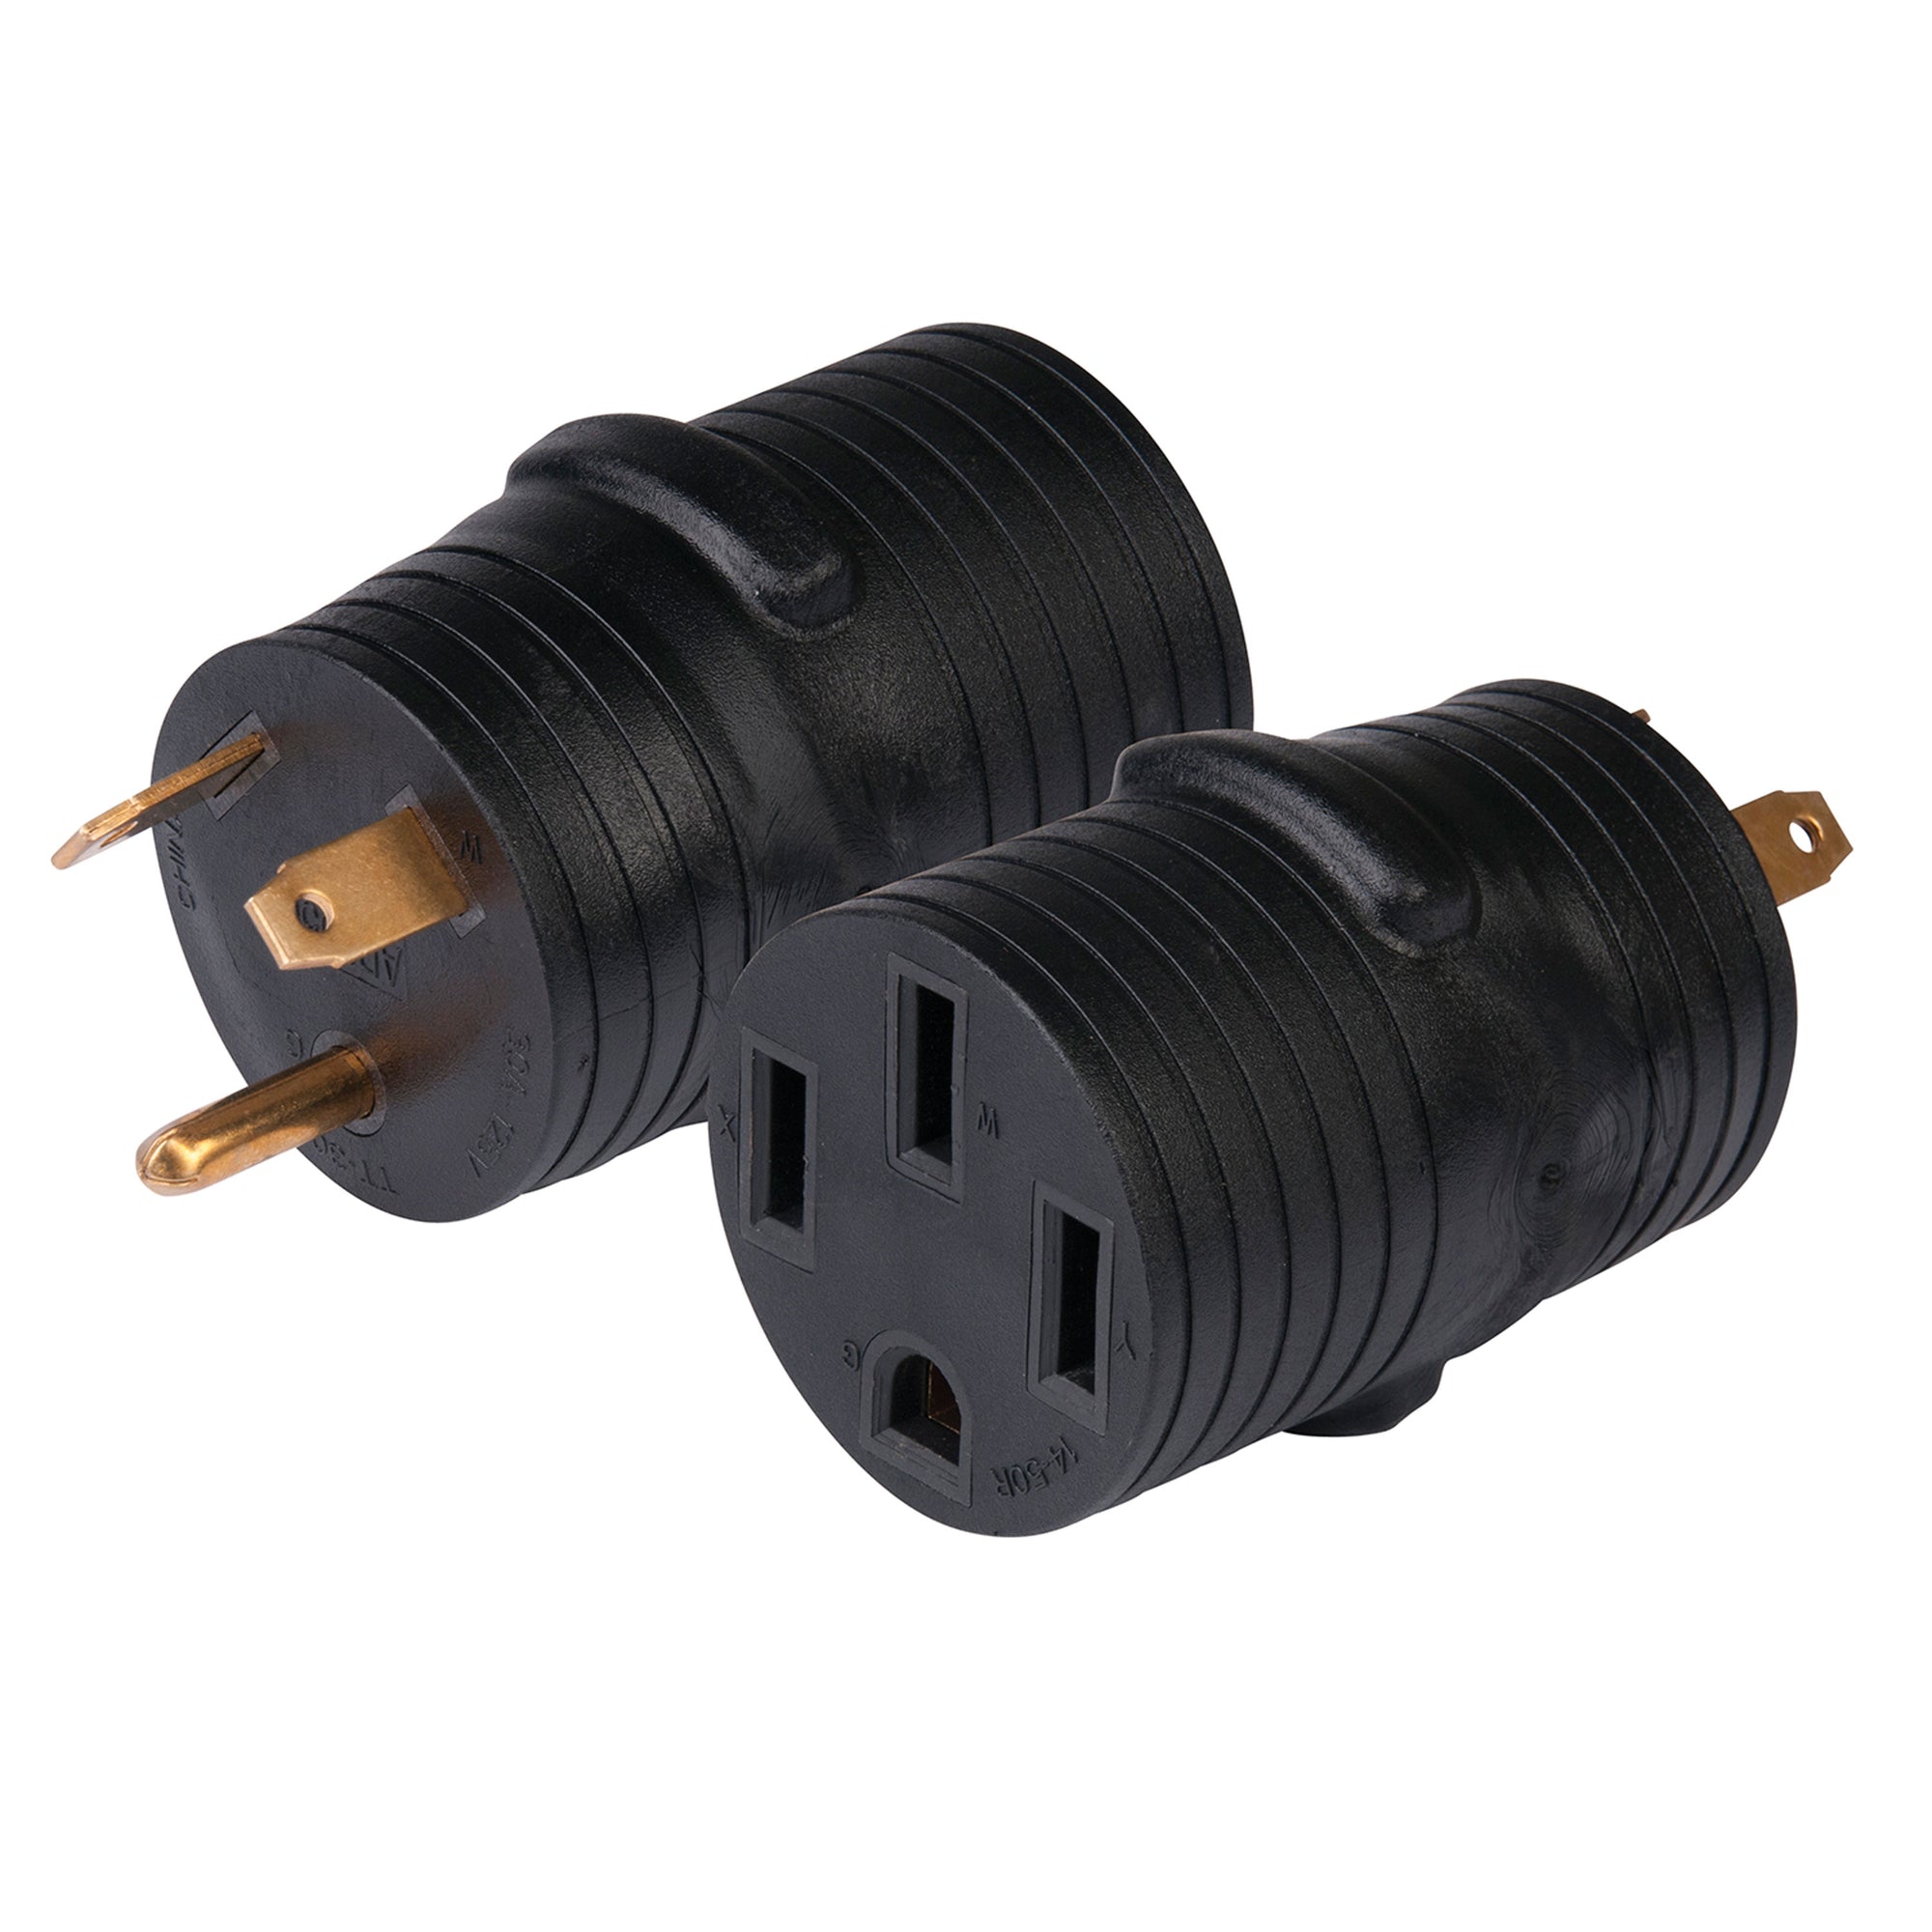 ParkPower 3050RVSA One-Piece Adapter - 30A Male to 50A Female